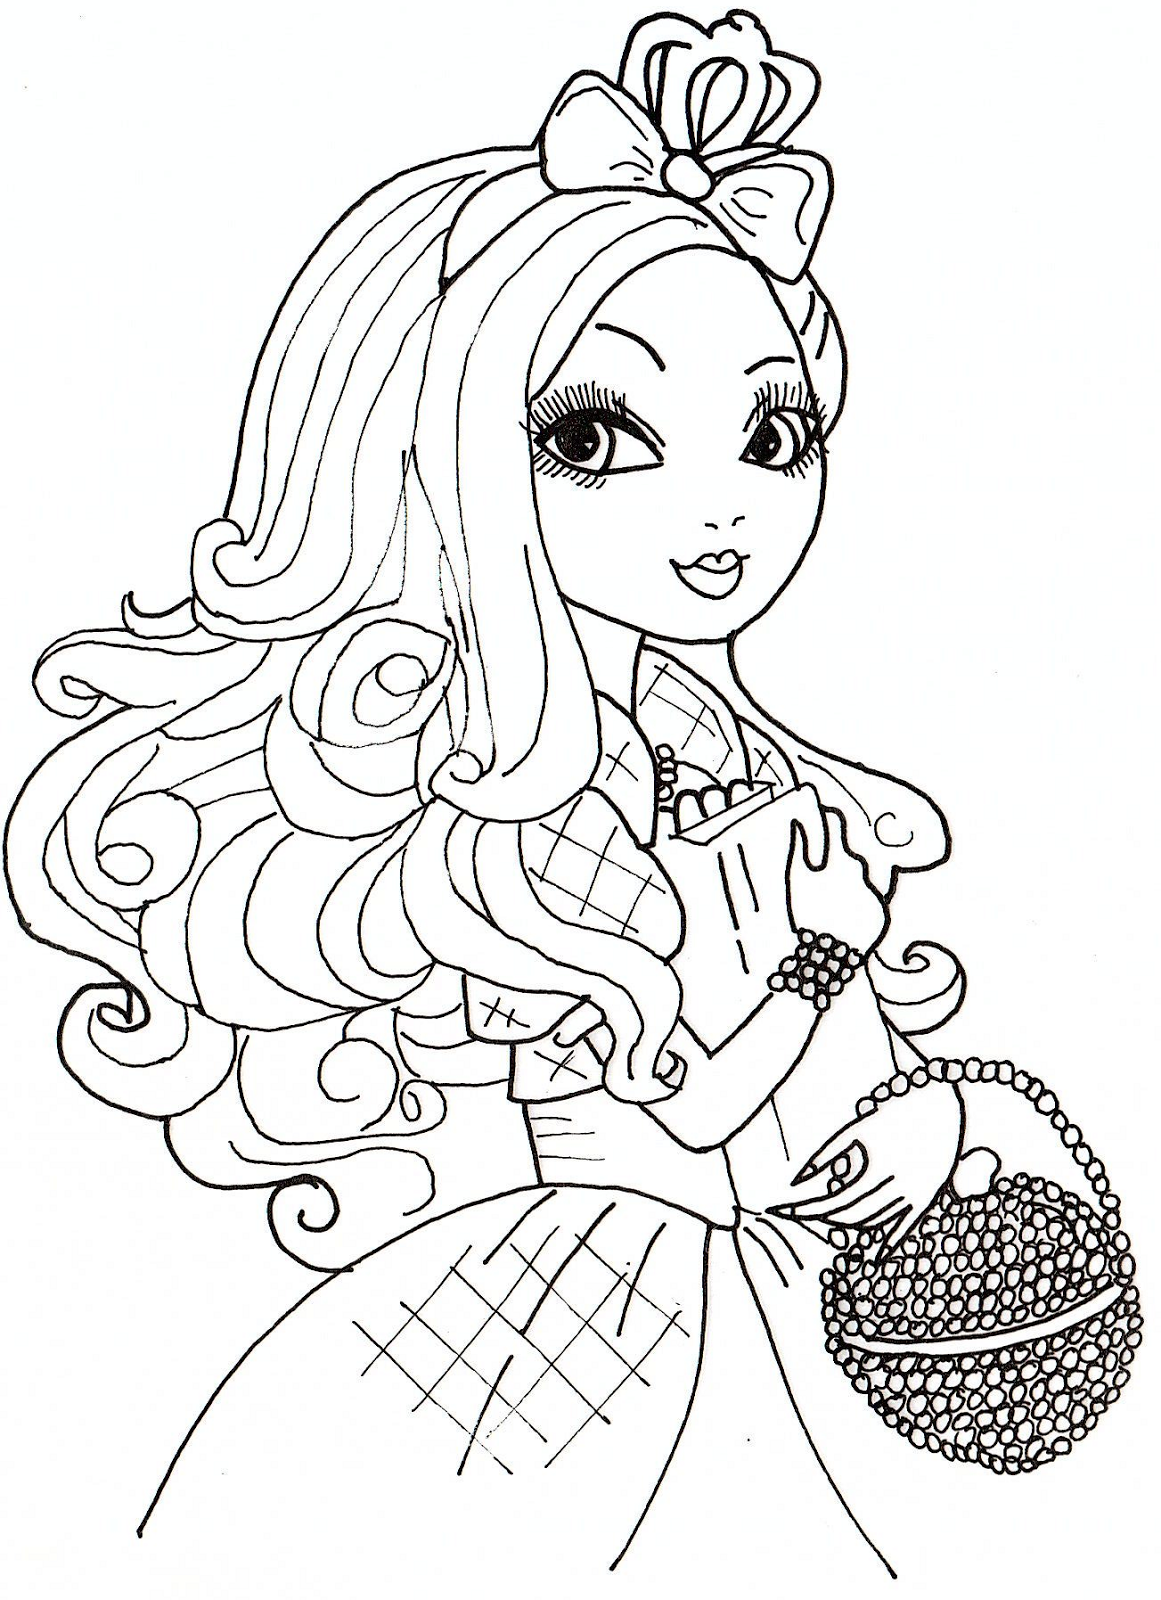 free-printable-ever-after-high-coloring-pages-june-2013